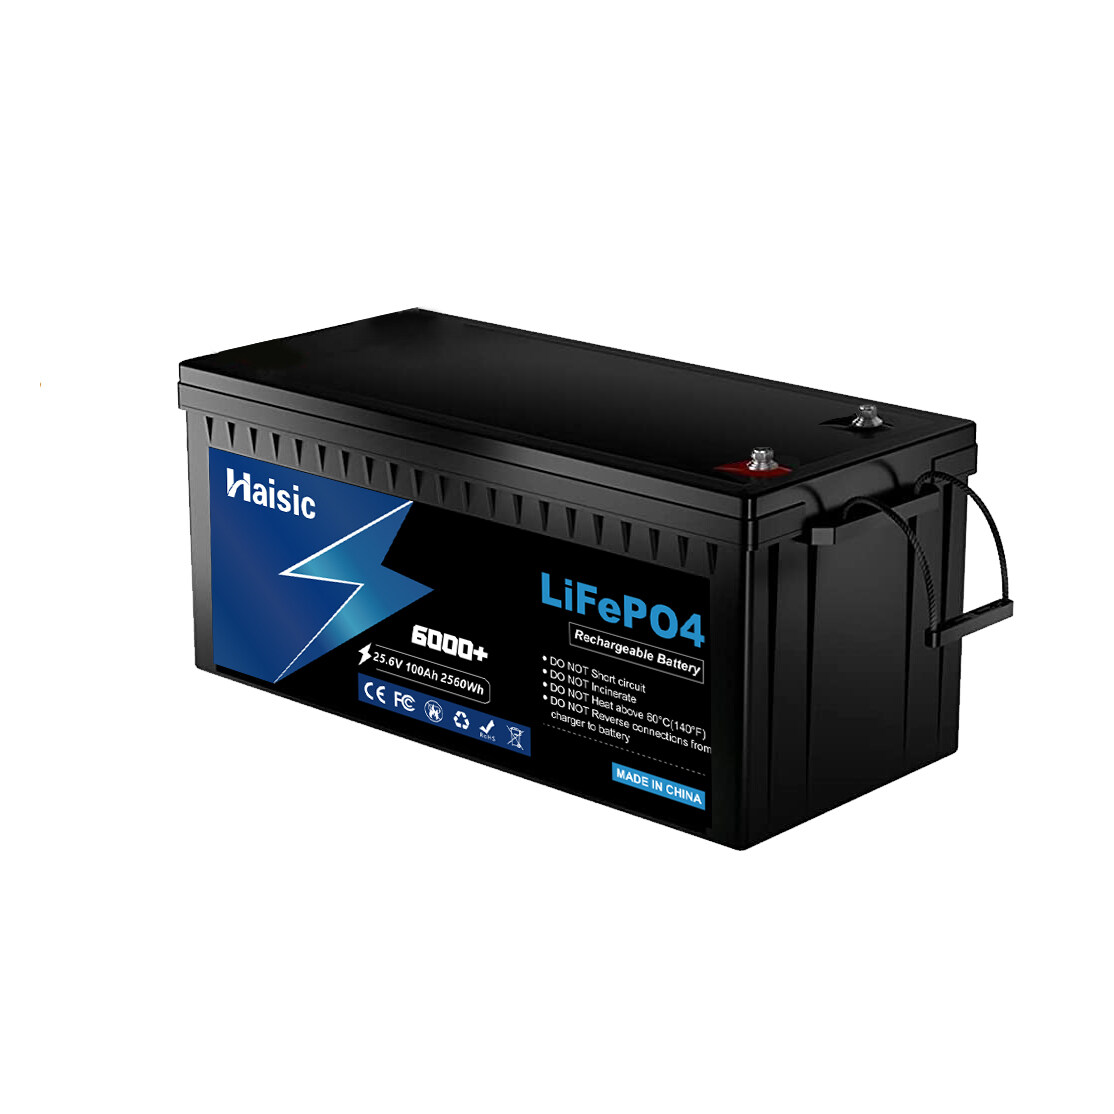 25.6V 2560Wh LifePO4 battery pack home energy storage system by solar